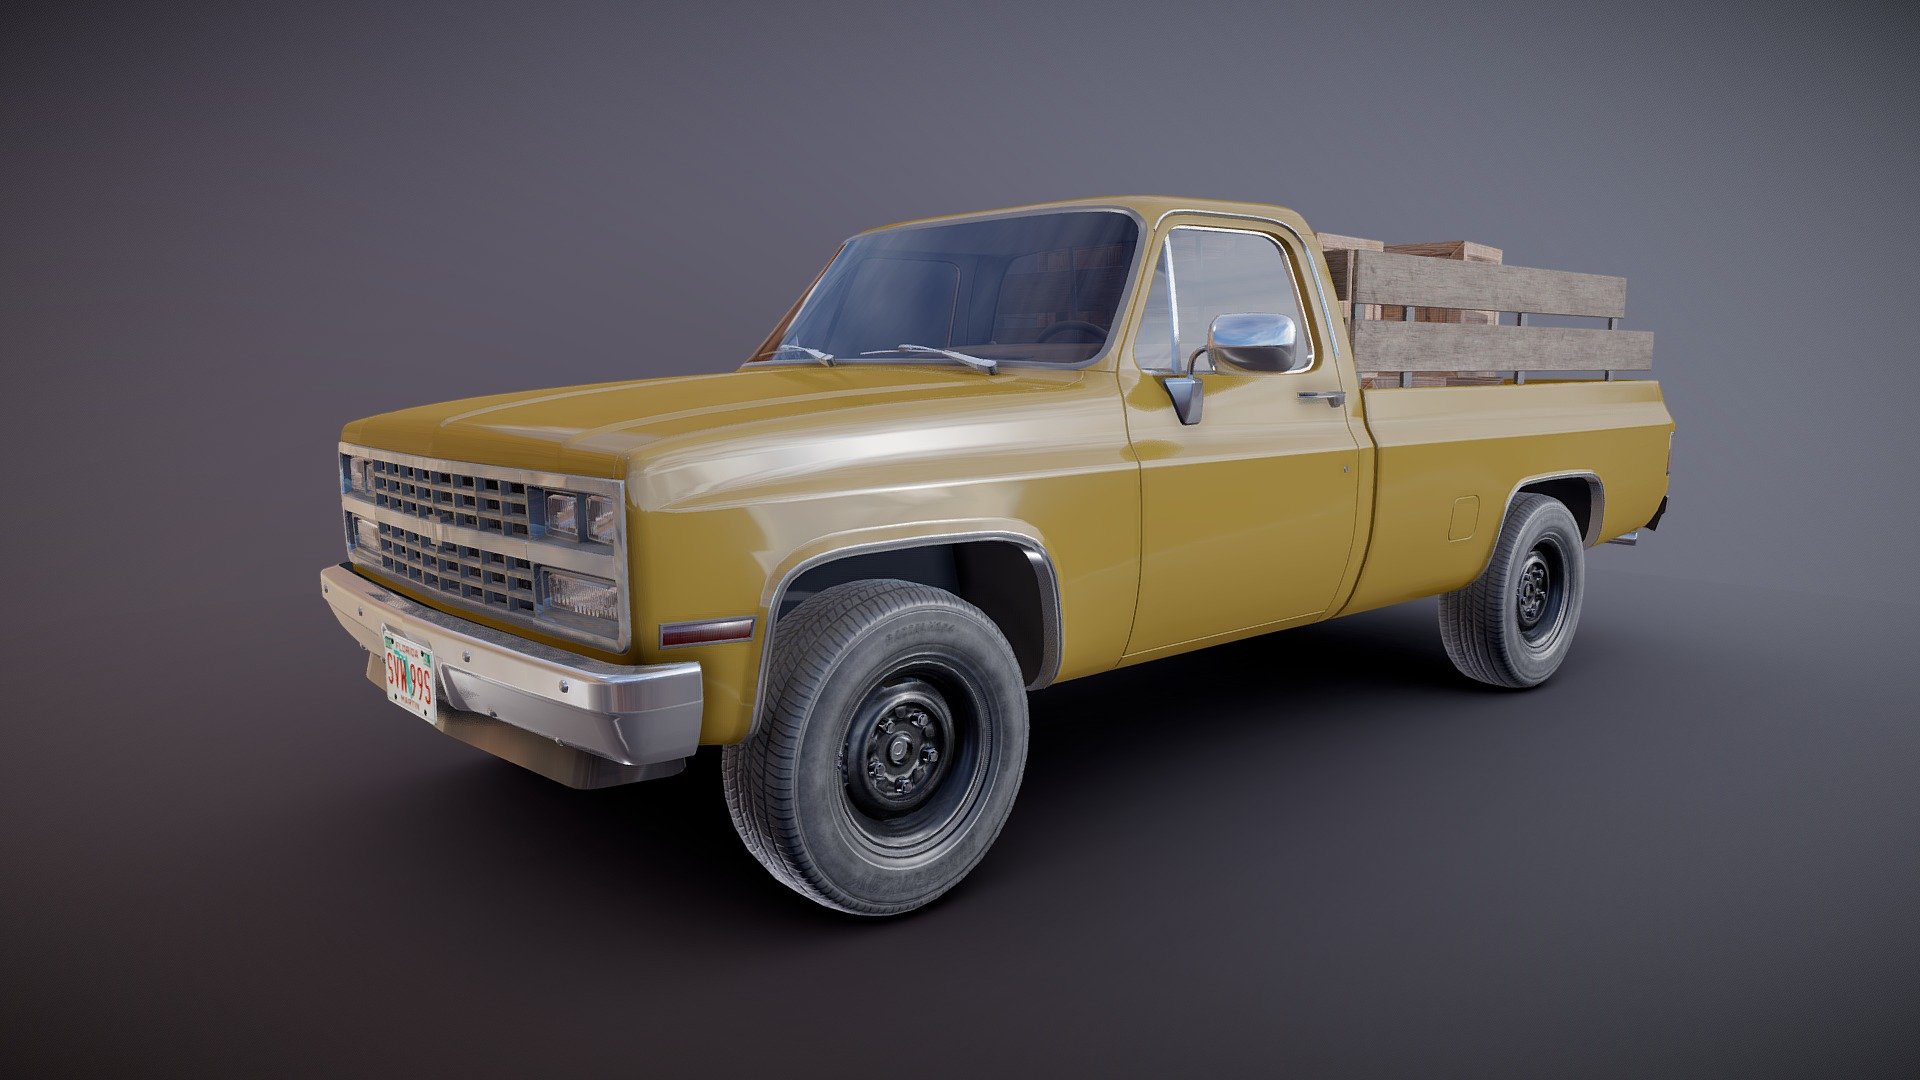 Farmer pickup truck game ready model.

Full textured model with clean topology.

High accuracy exterior model.

Different tires for rear and front wheels.

High detailed cabin - seams, chrome parts, wipers, mud flaps and etc.

Lowpoly interior - 2855 tris 1652 verts

Wheels - 11292 tris 6104 verts

Full model - 47180 tris 27644 verts.

High detailed rims and tires, with PBR maps(Base_Color/Metallic/Normal/Roughness.png2048x2048 )

Model ready for real-time apps, games, virtual reality and augmented reality.

Asset looks accuracy and realistic and become a good part of your project 3d model